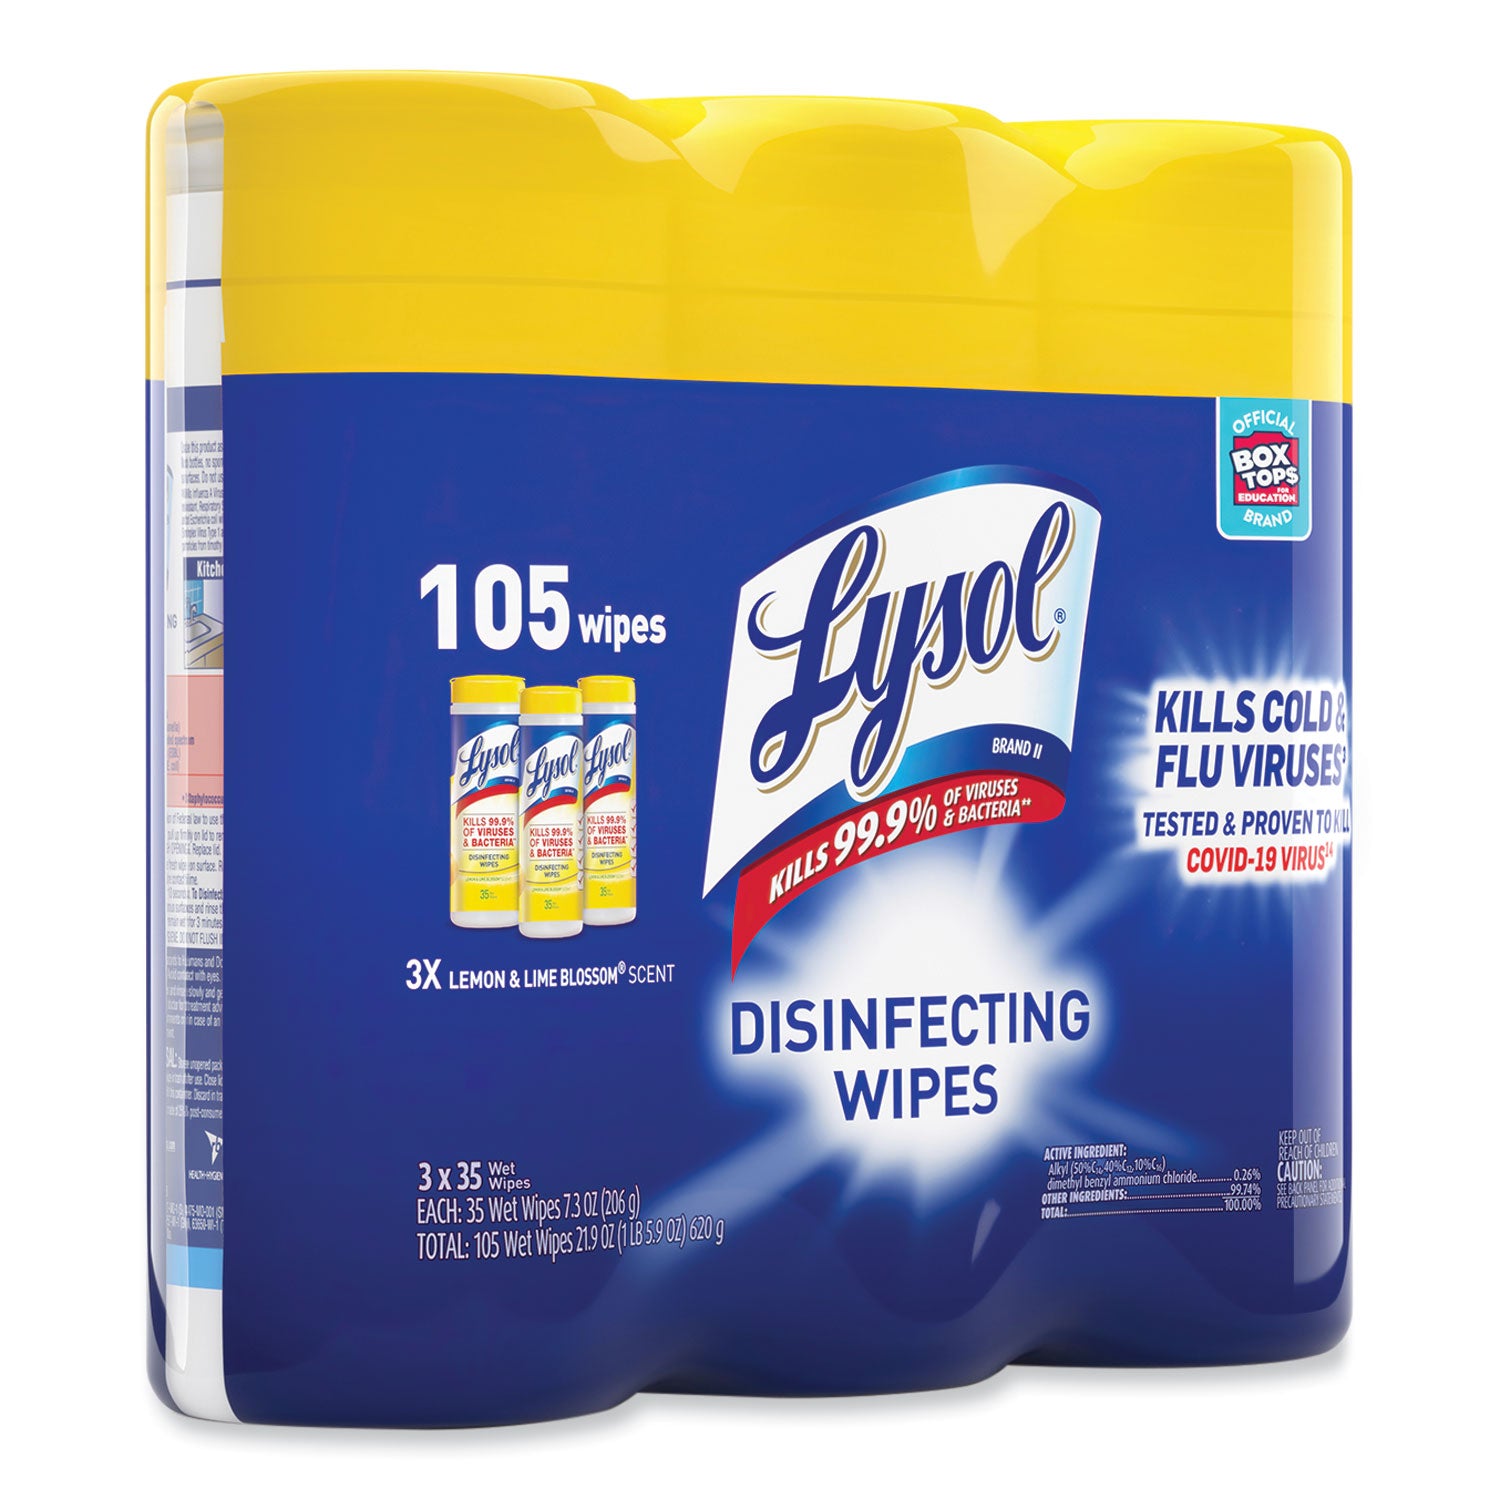 disinfecting-wipes-1-ply-7-x-725-lemon-and-lime-blossom-white-35-wipes-canister-3-canisters-pack_rac82159pk - 3